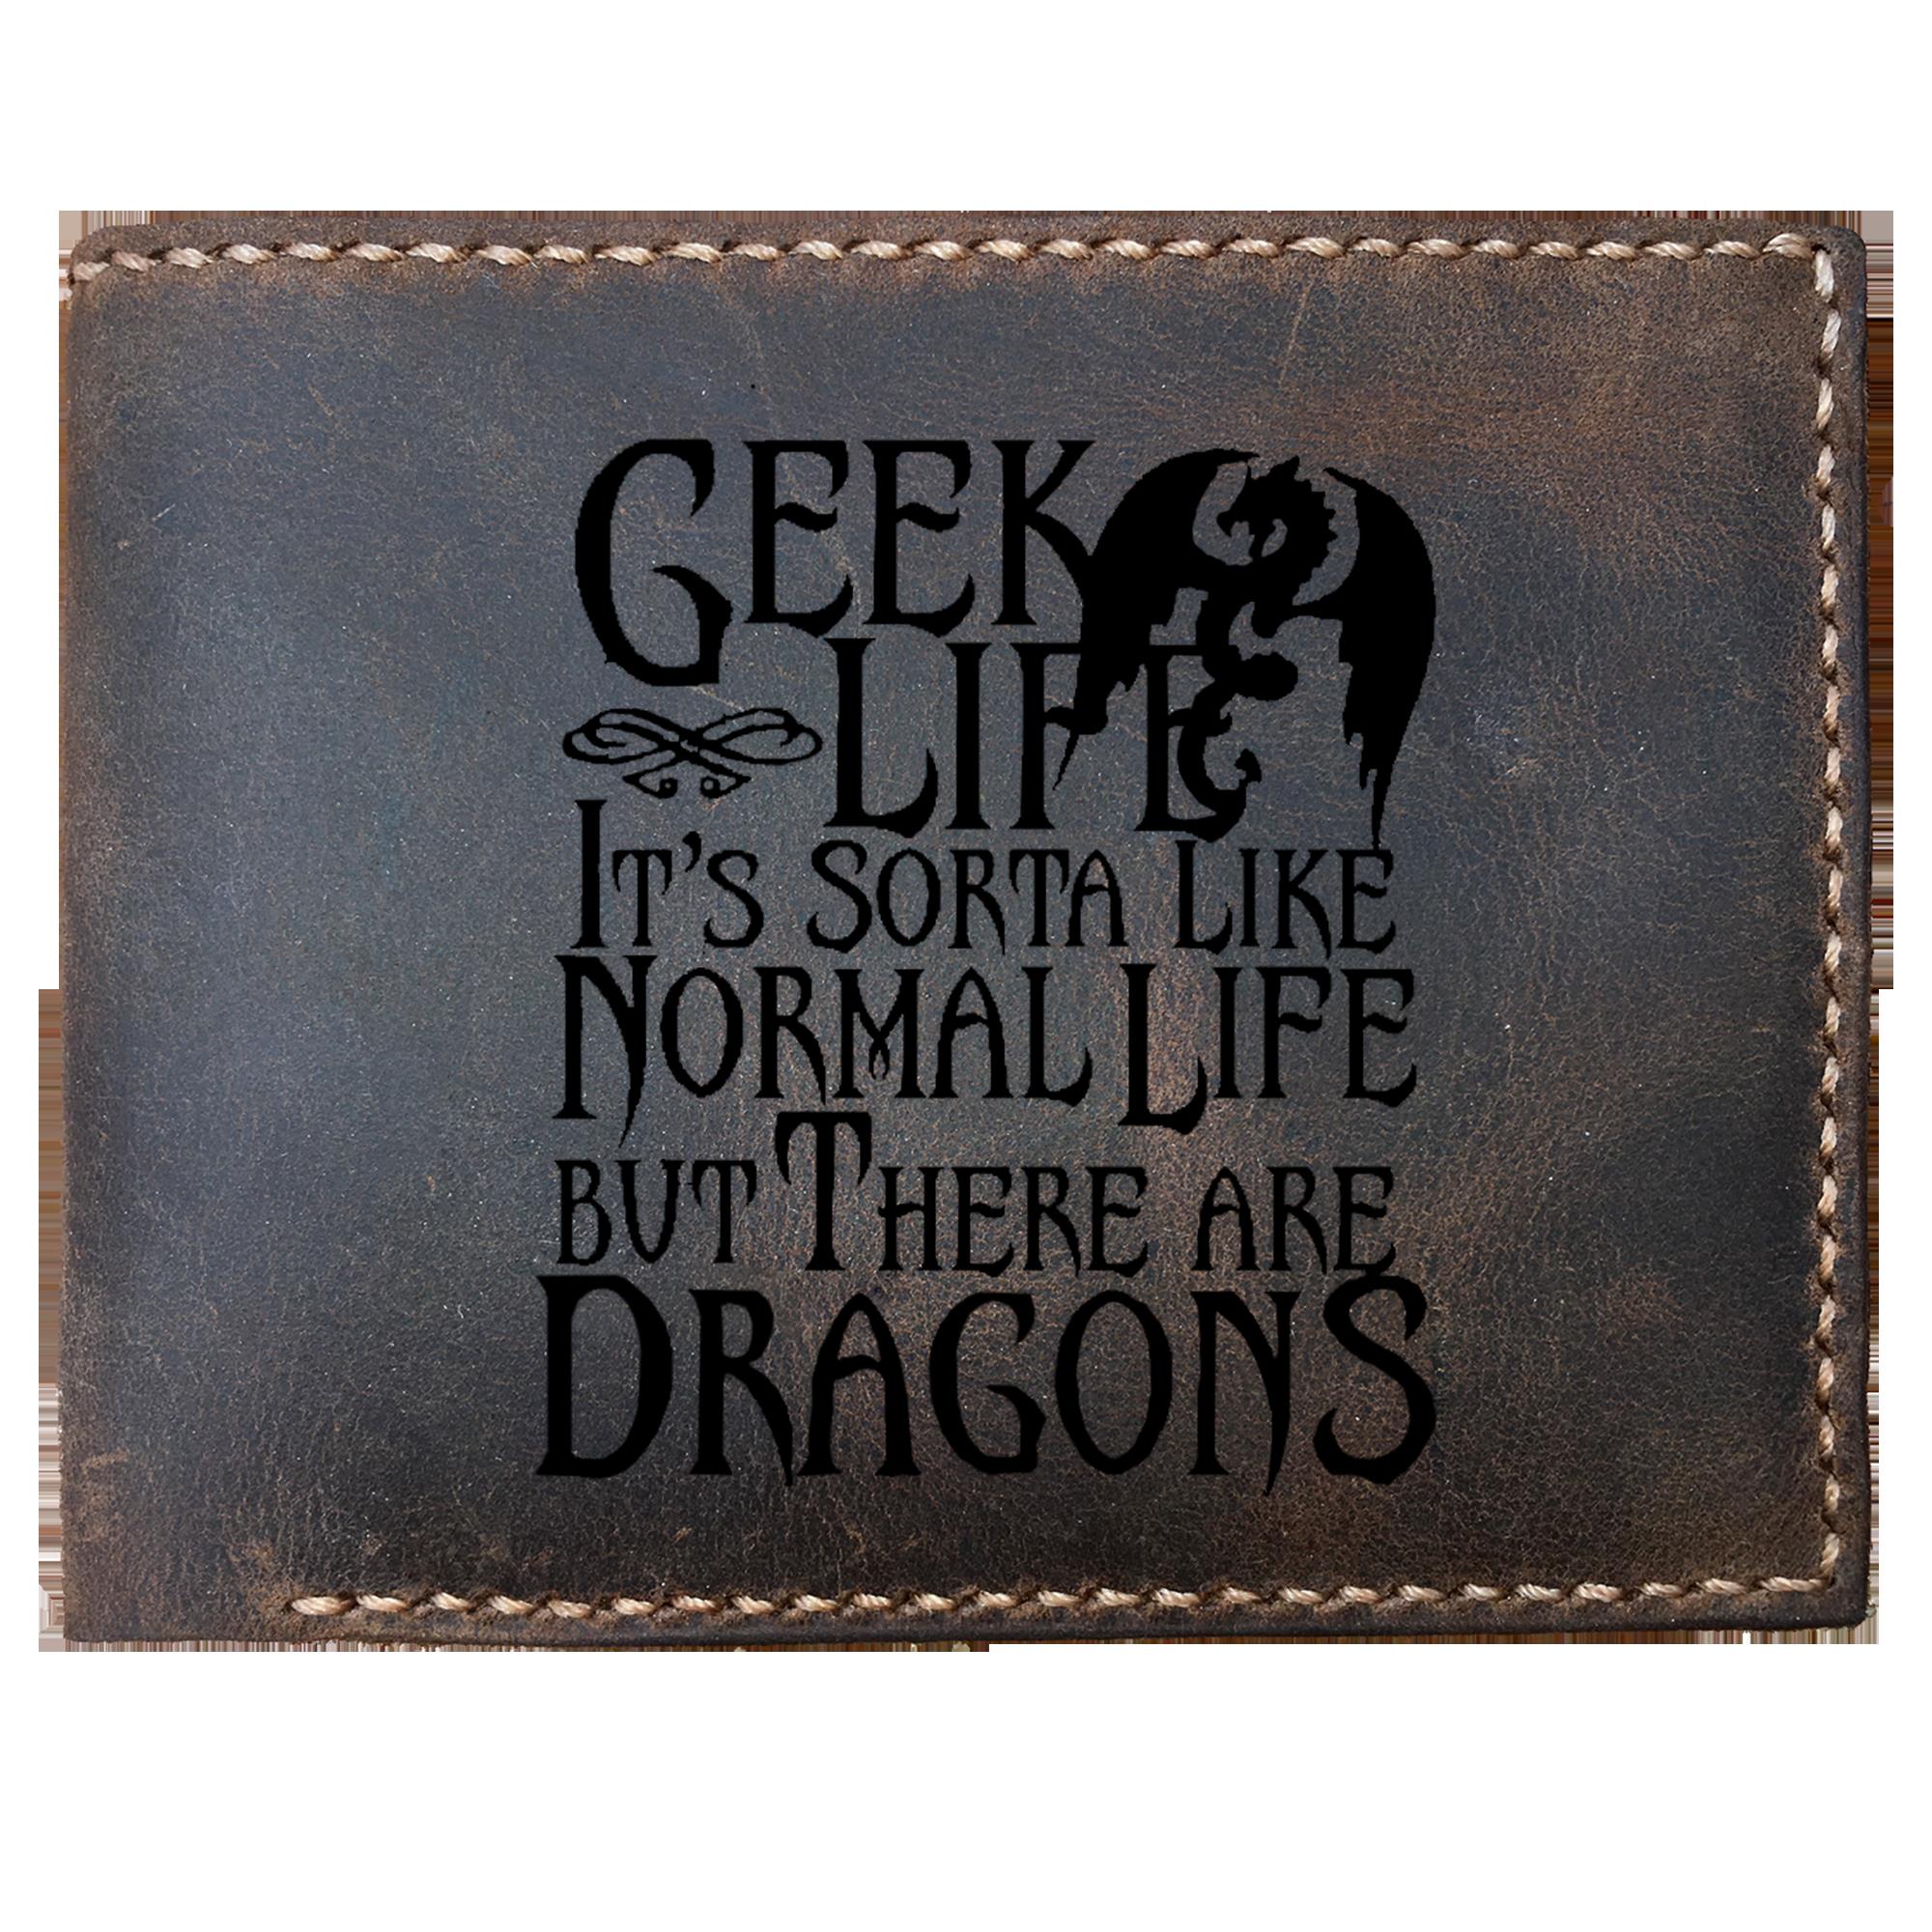 Skitongifts Funny Custom Laser Engraved Bifold Leather Wallet For Men, Geek Life Its Like Normal Life Except With Dragons Gamer Dungeon Nerd